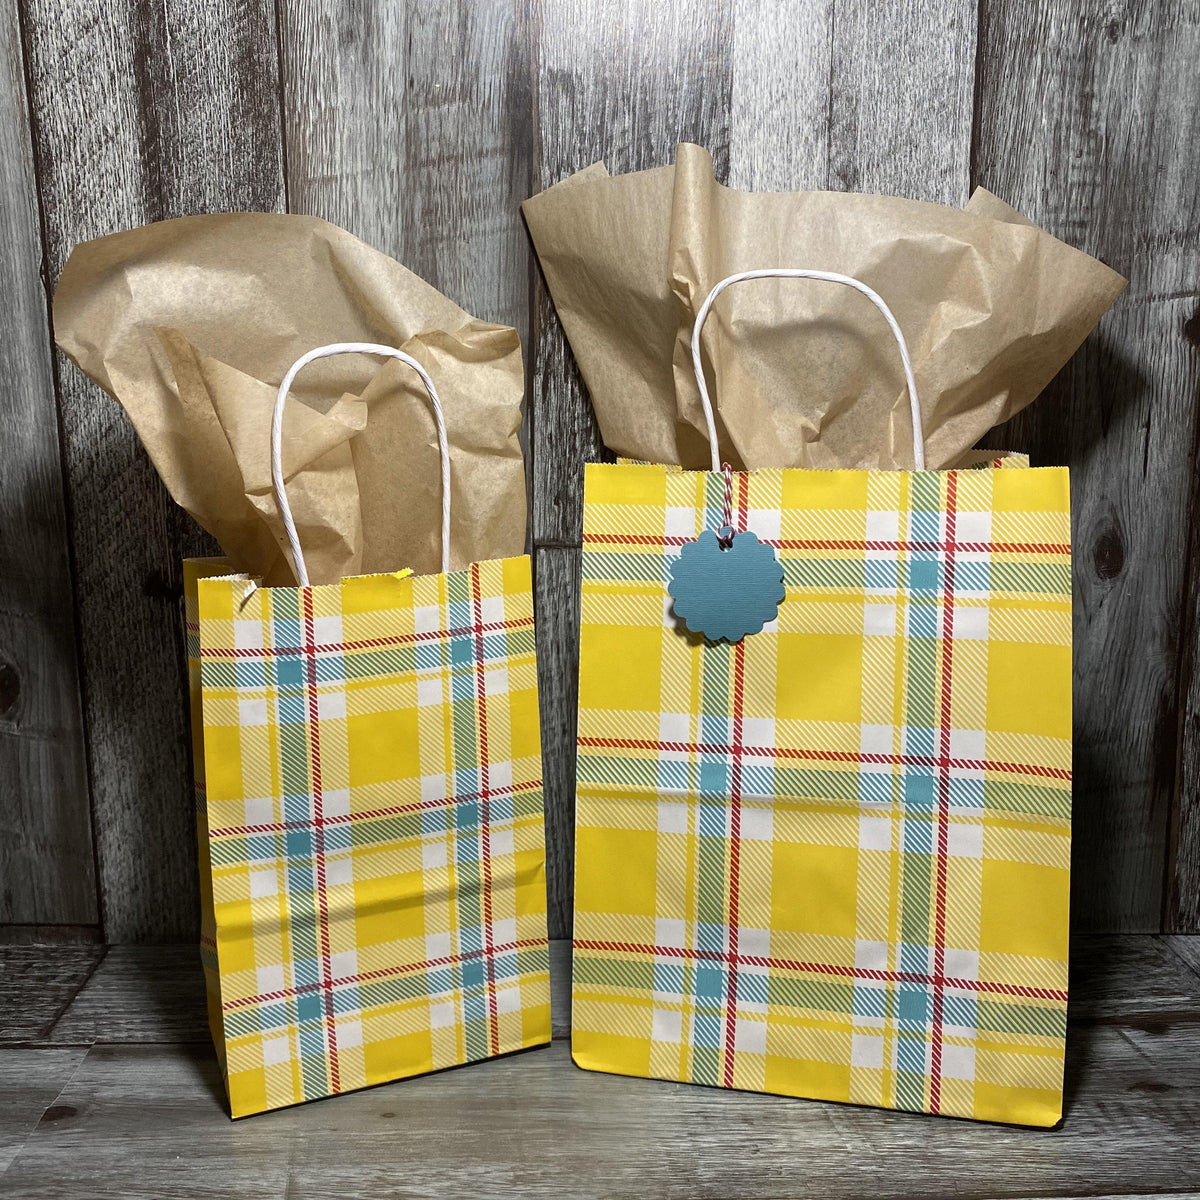 Gift Baskets by Debbie Yellow Sunflower Gift Bags Tissue Paper